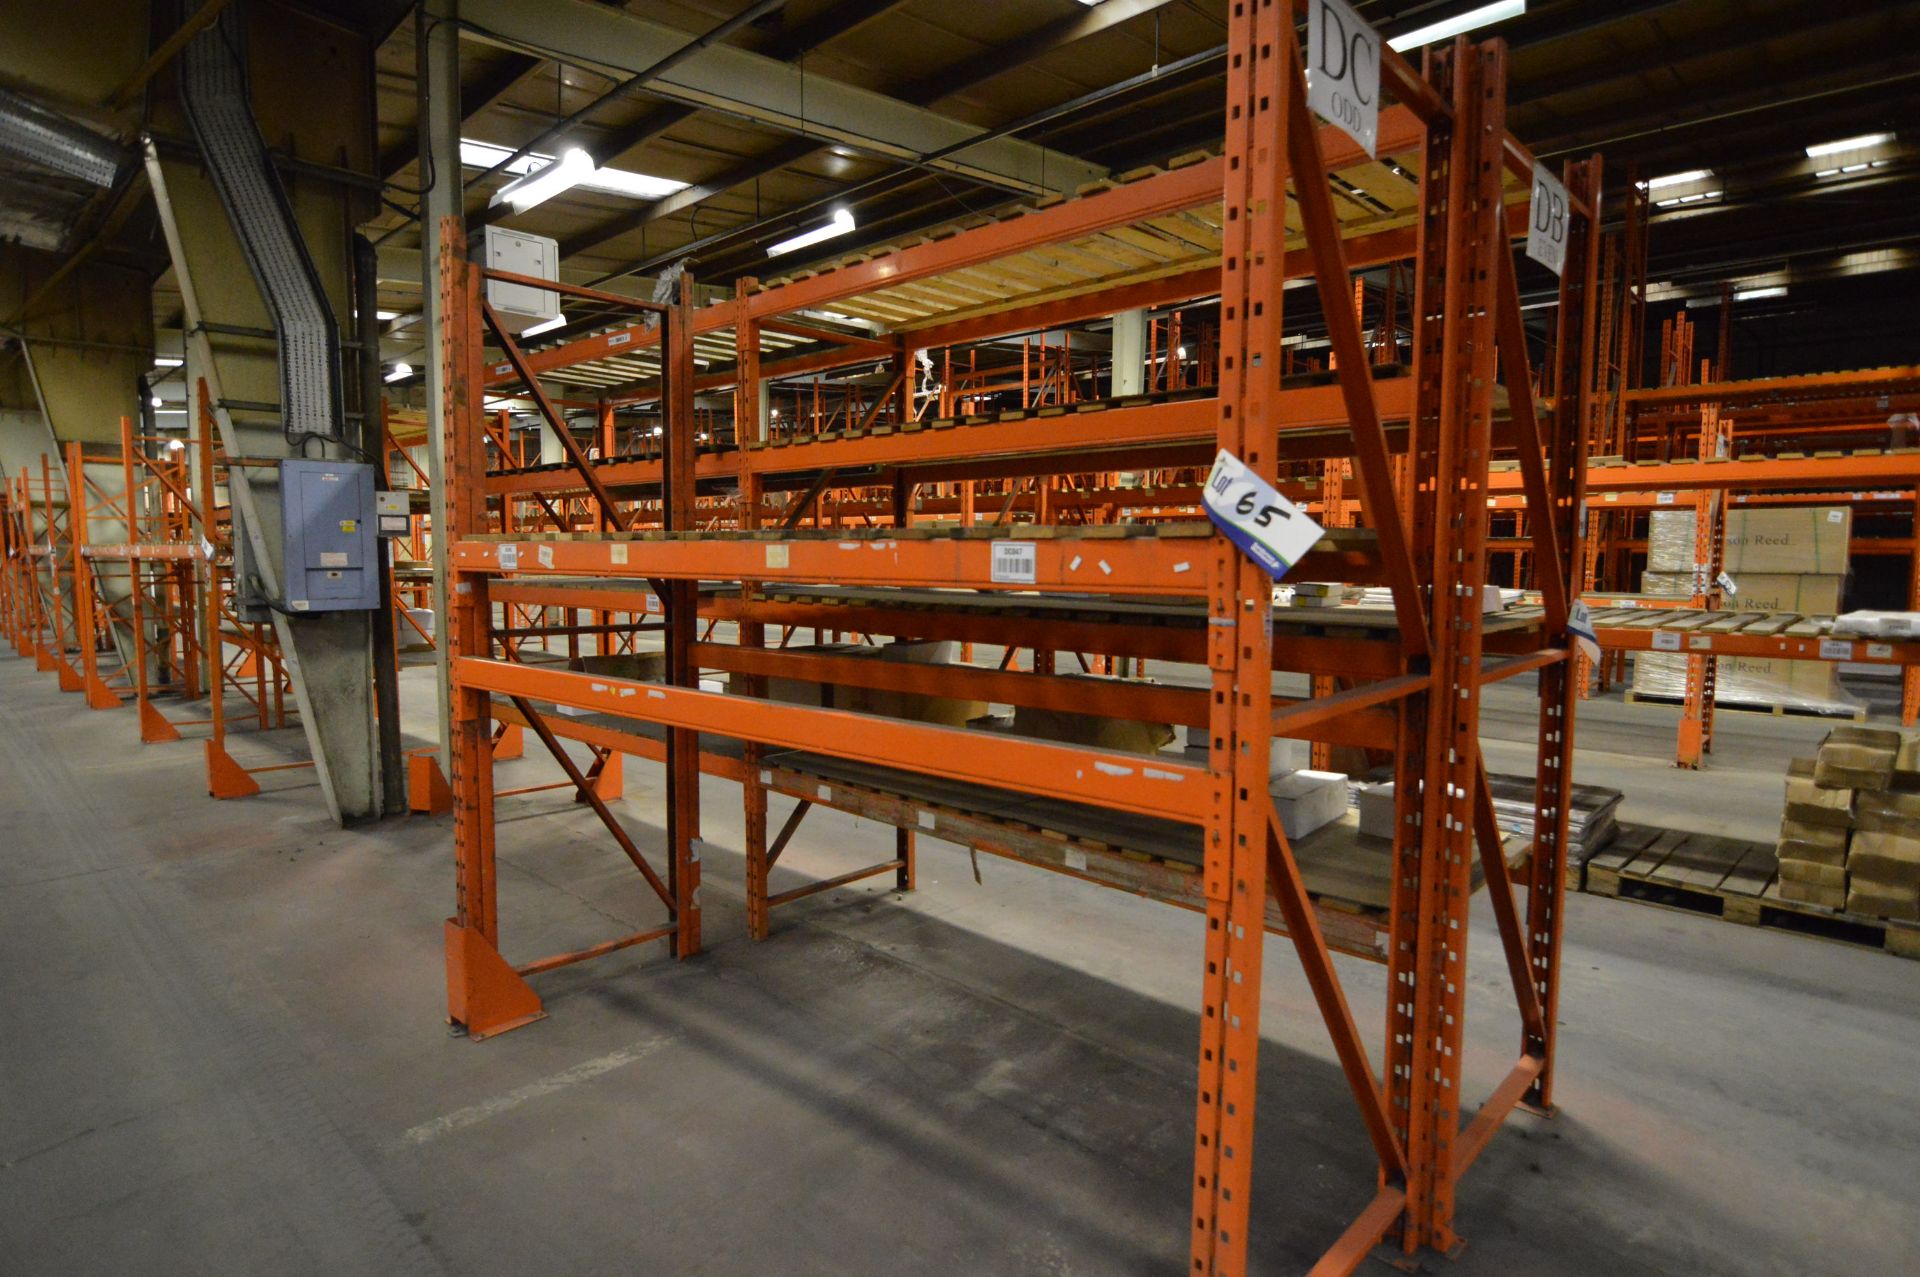 Redirack SD1.70 Single Sided Single Bay Two Tier Pallet Rack, approx. 2.8m long x 900mm x 2.7m high,